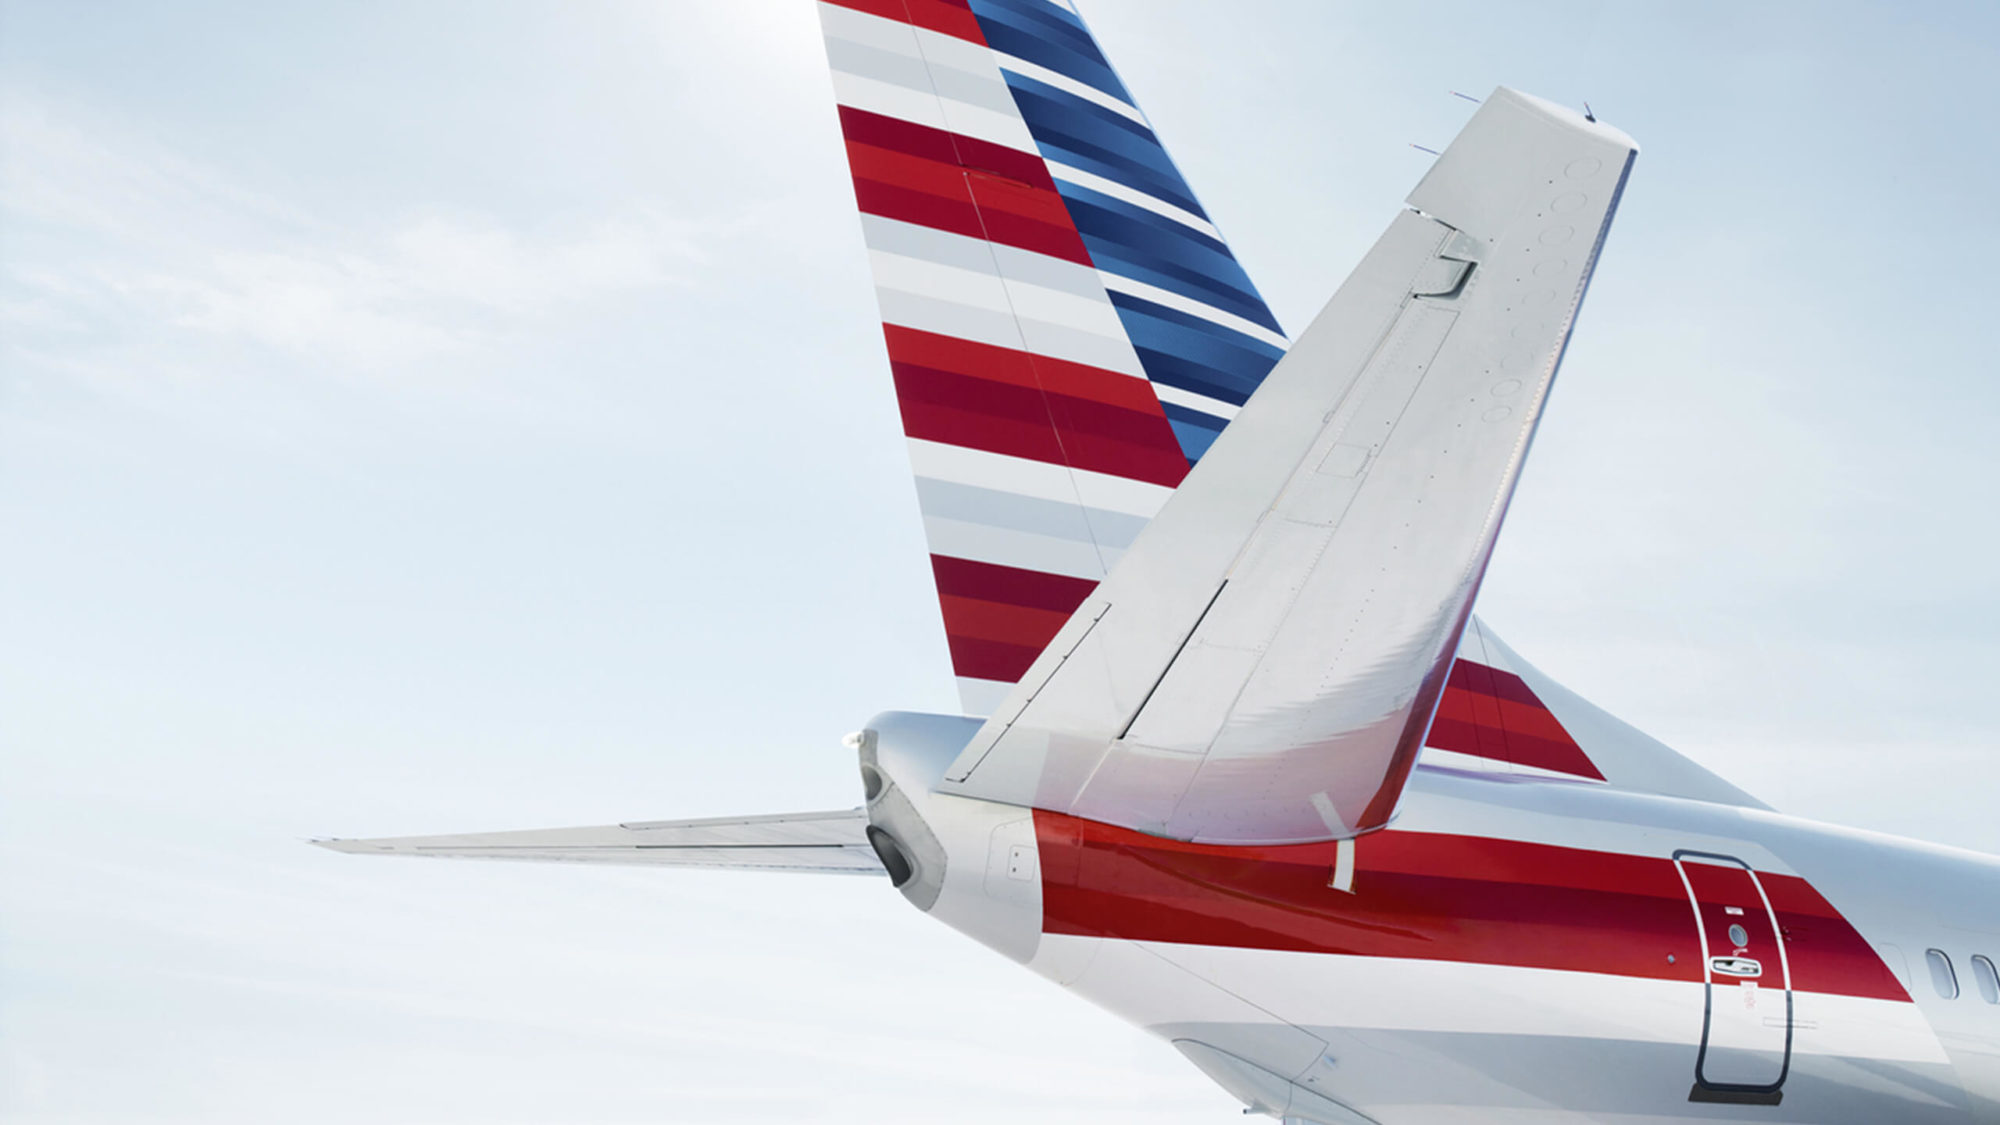 American Airlines Rebrand, Tail Livery